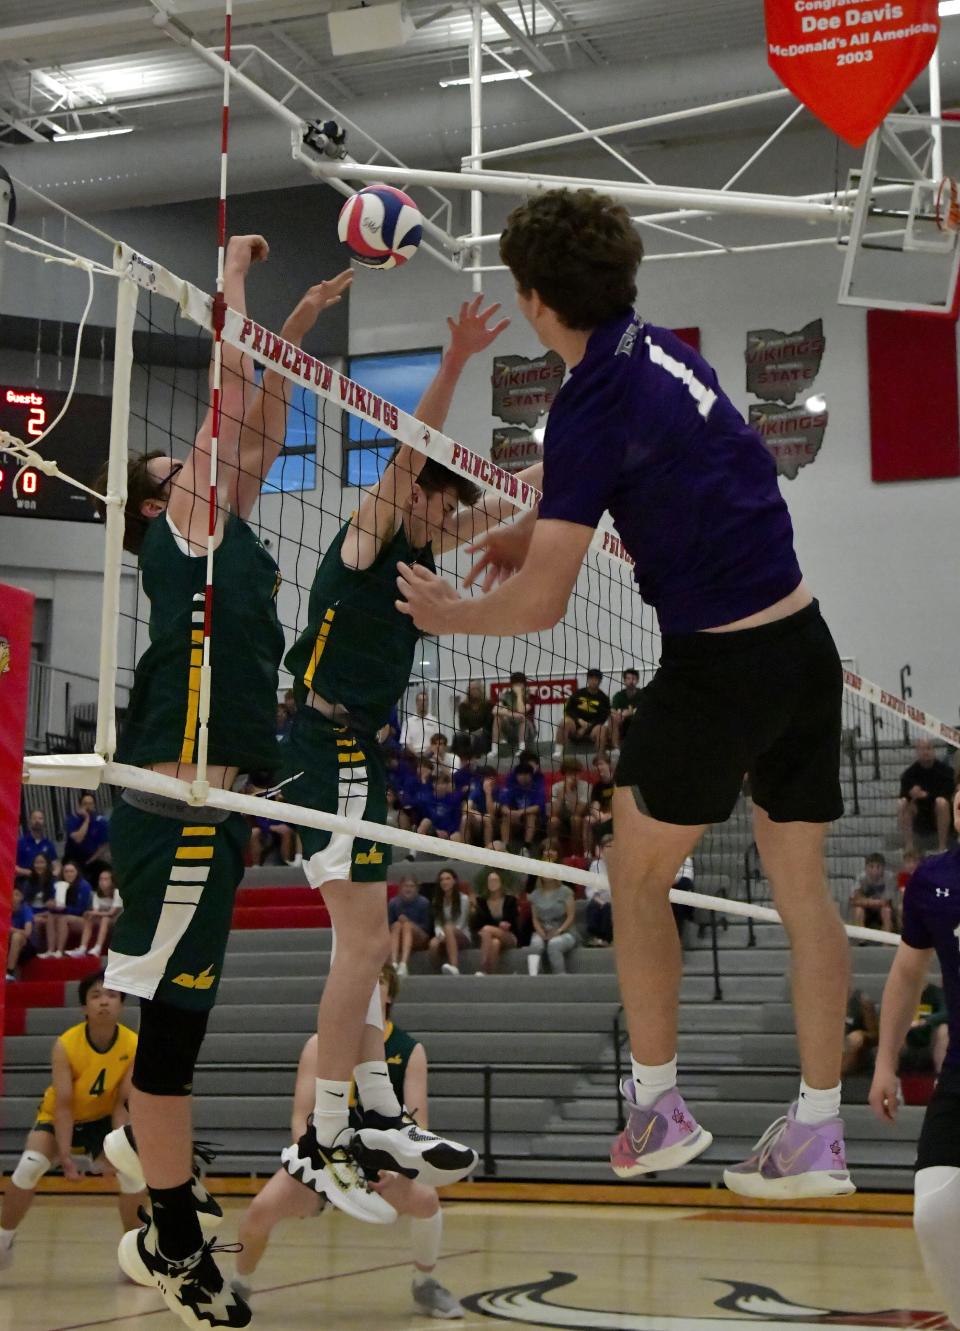 Drew Maune (1) of Elder powers the ball over the net past the Sycamore defense for a Panther score at the OHSBVA South Region championships, May 28, 2022.